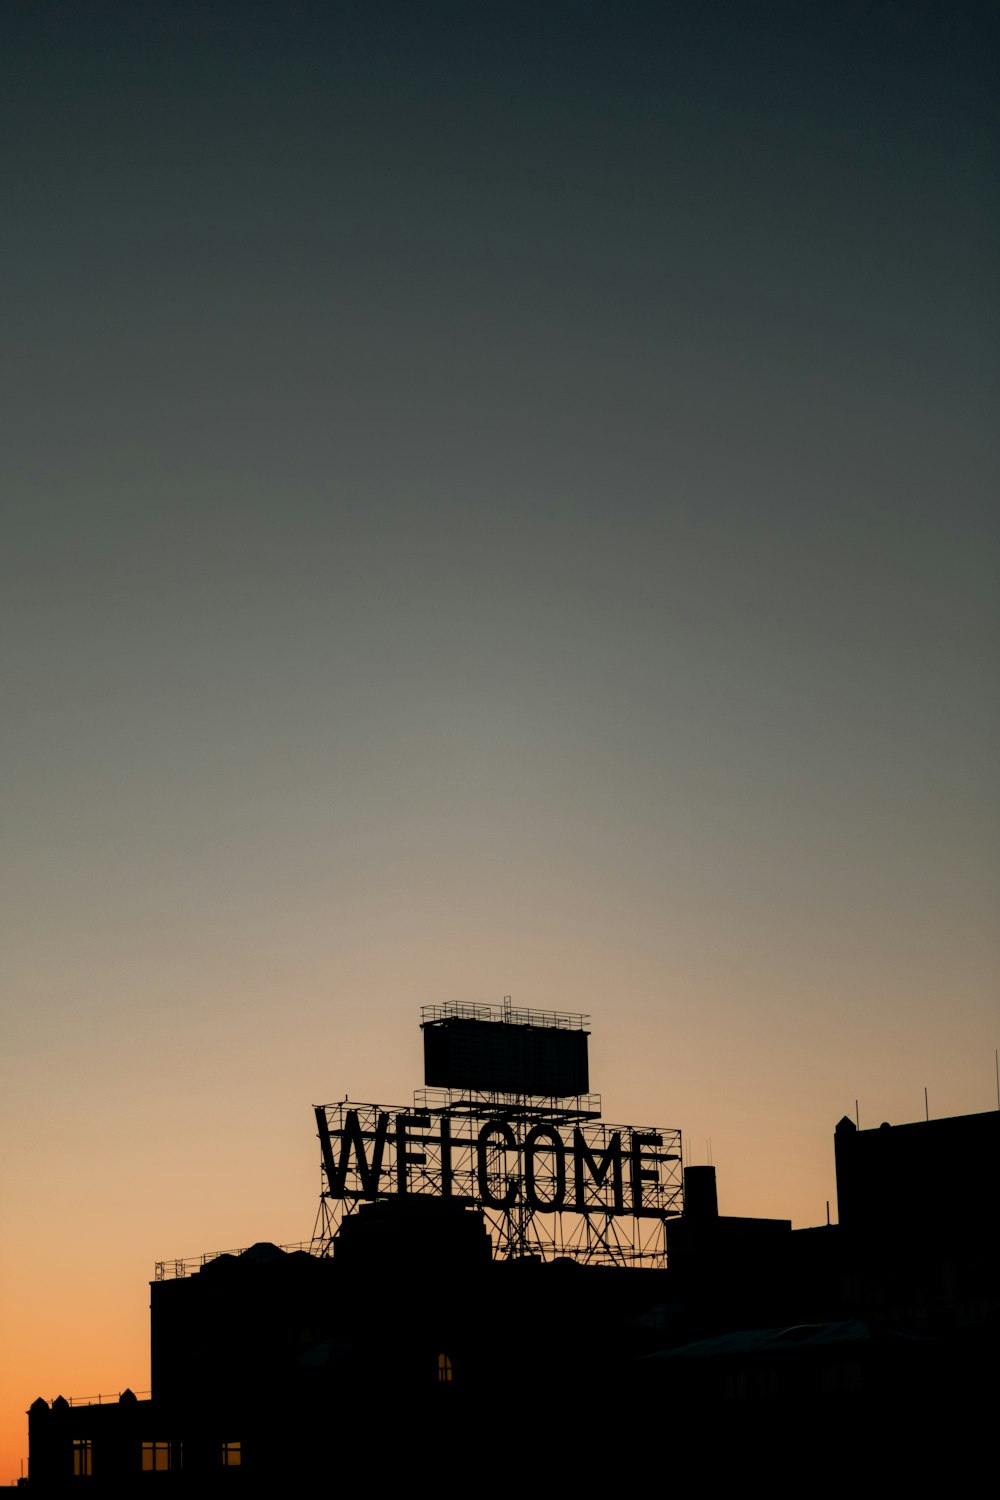 a welcome sign is silhouetted against the evening sky